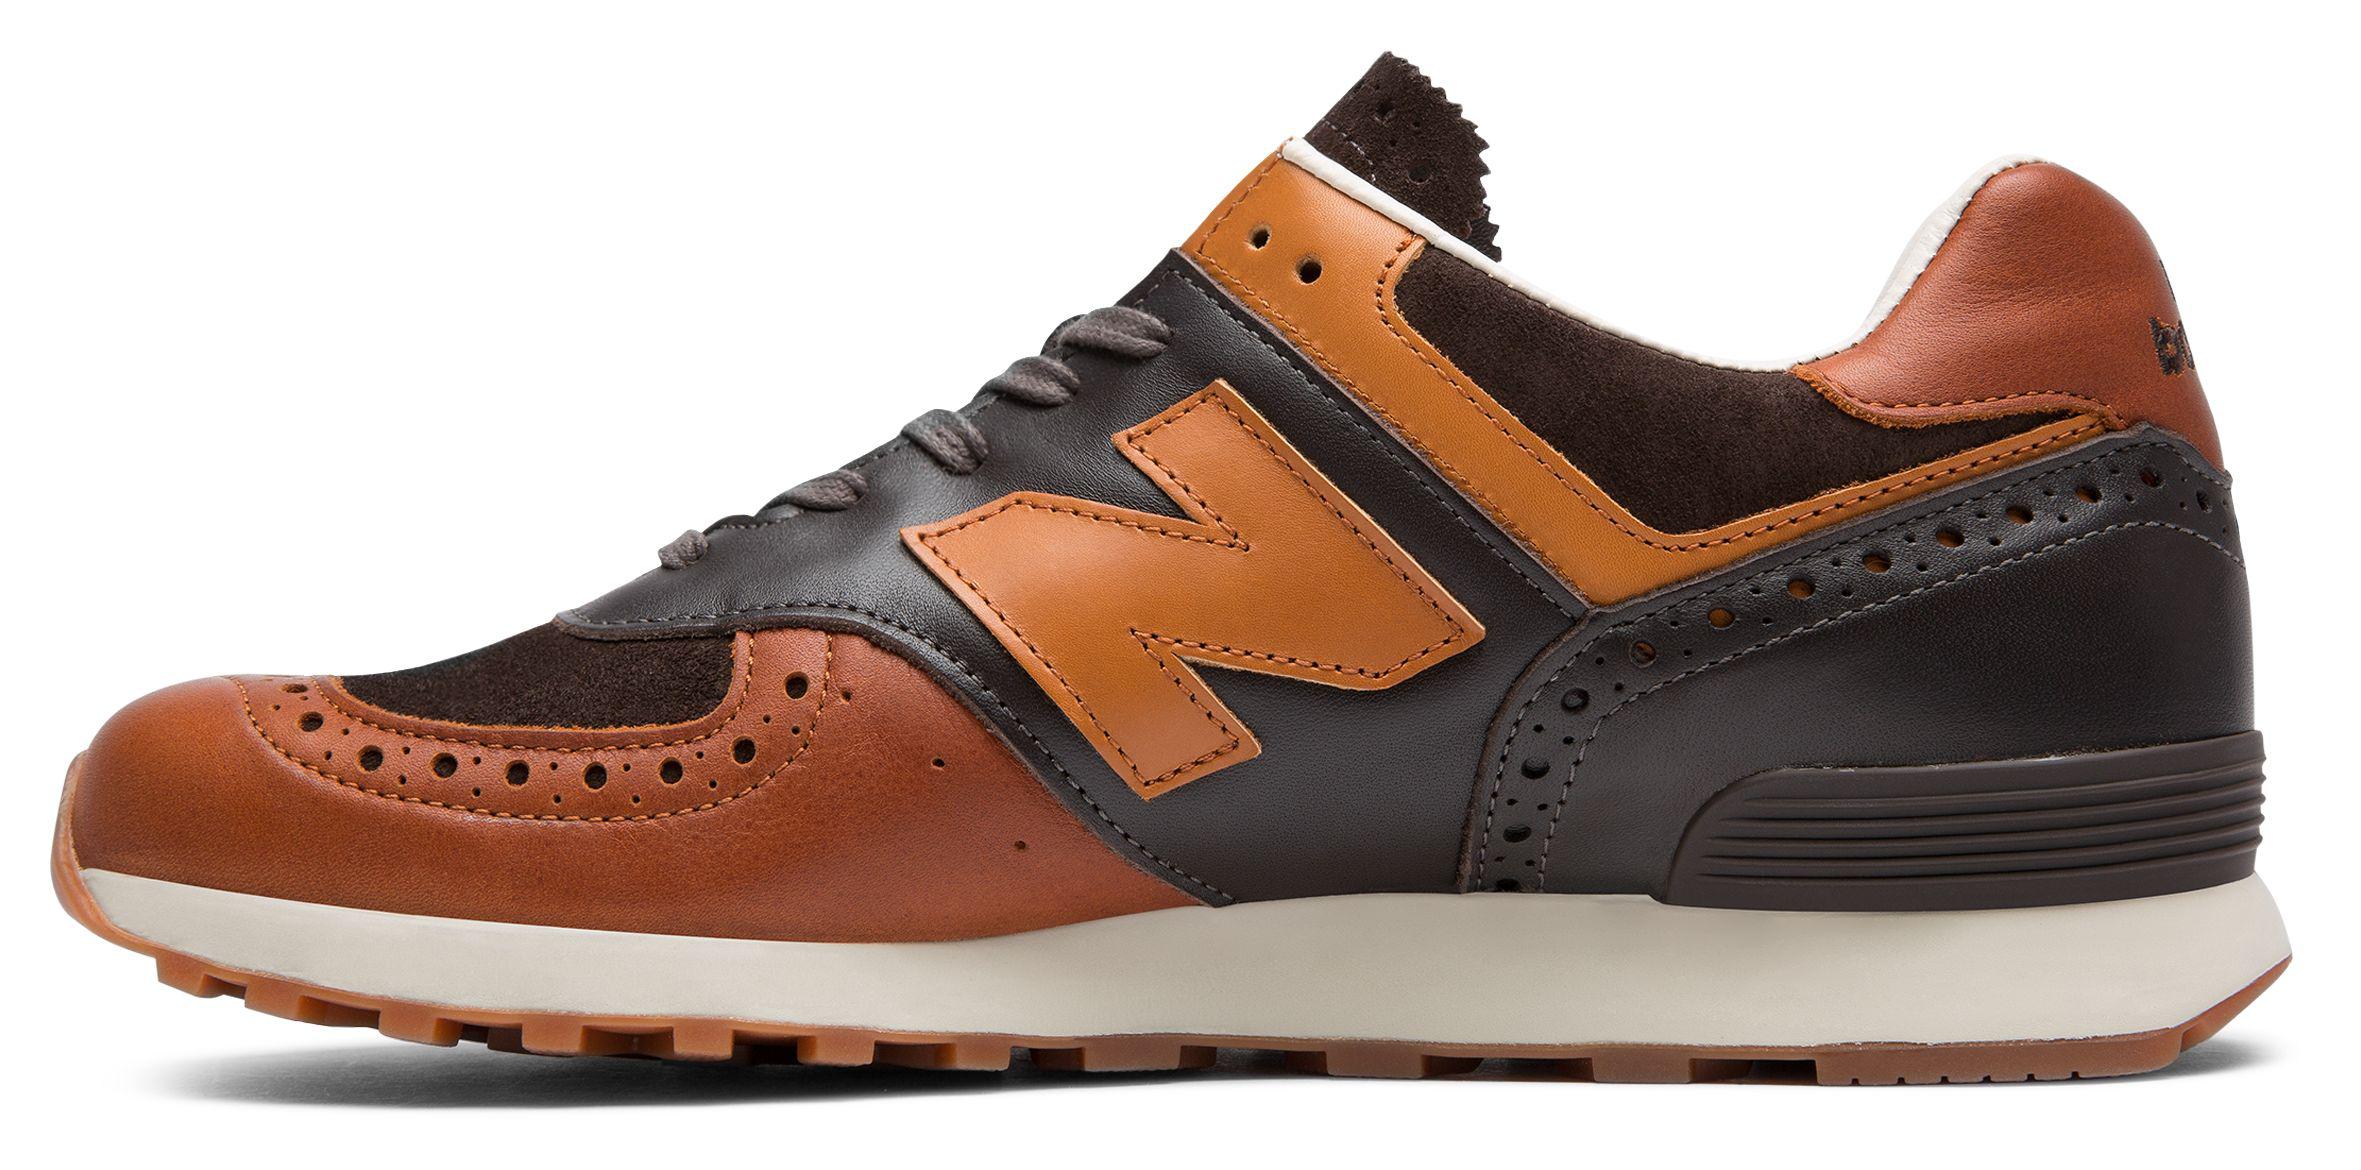 New Balance Leather Grenson X 576 in Brown for Men - Lyst